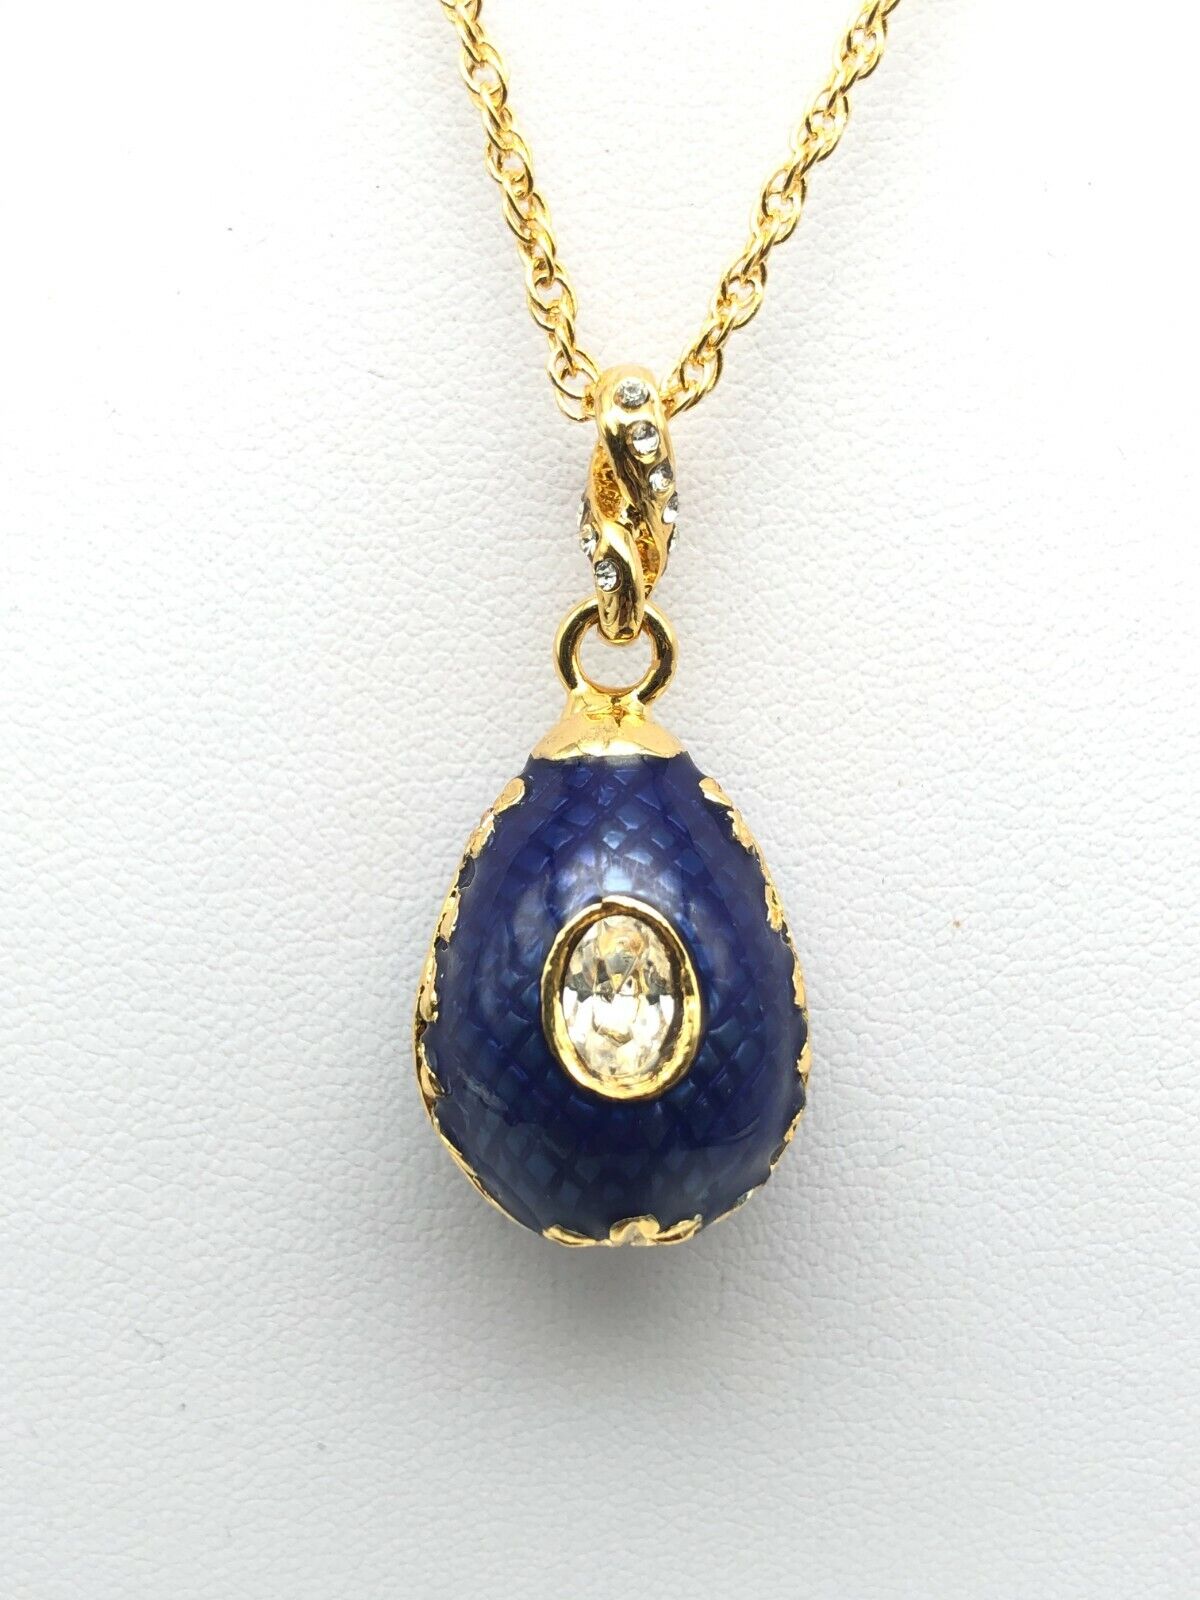 Blue Egg Pendant Necklace with crystals by Keren Kopal